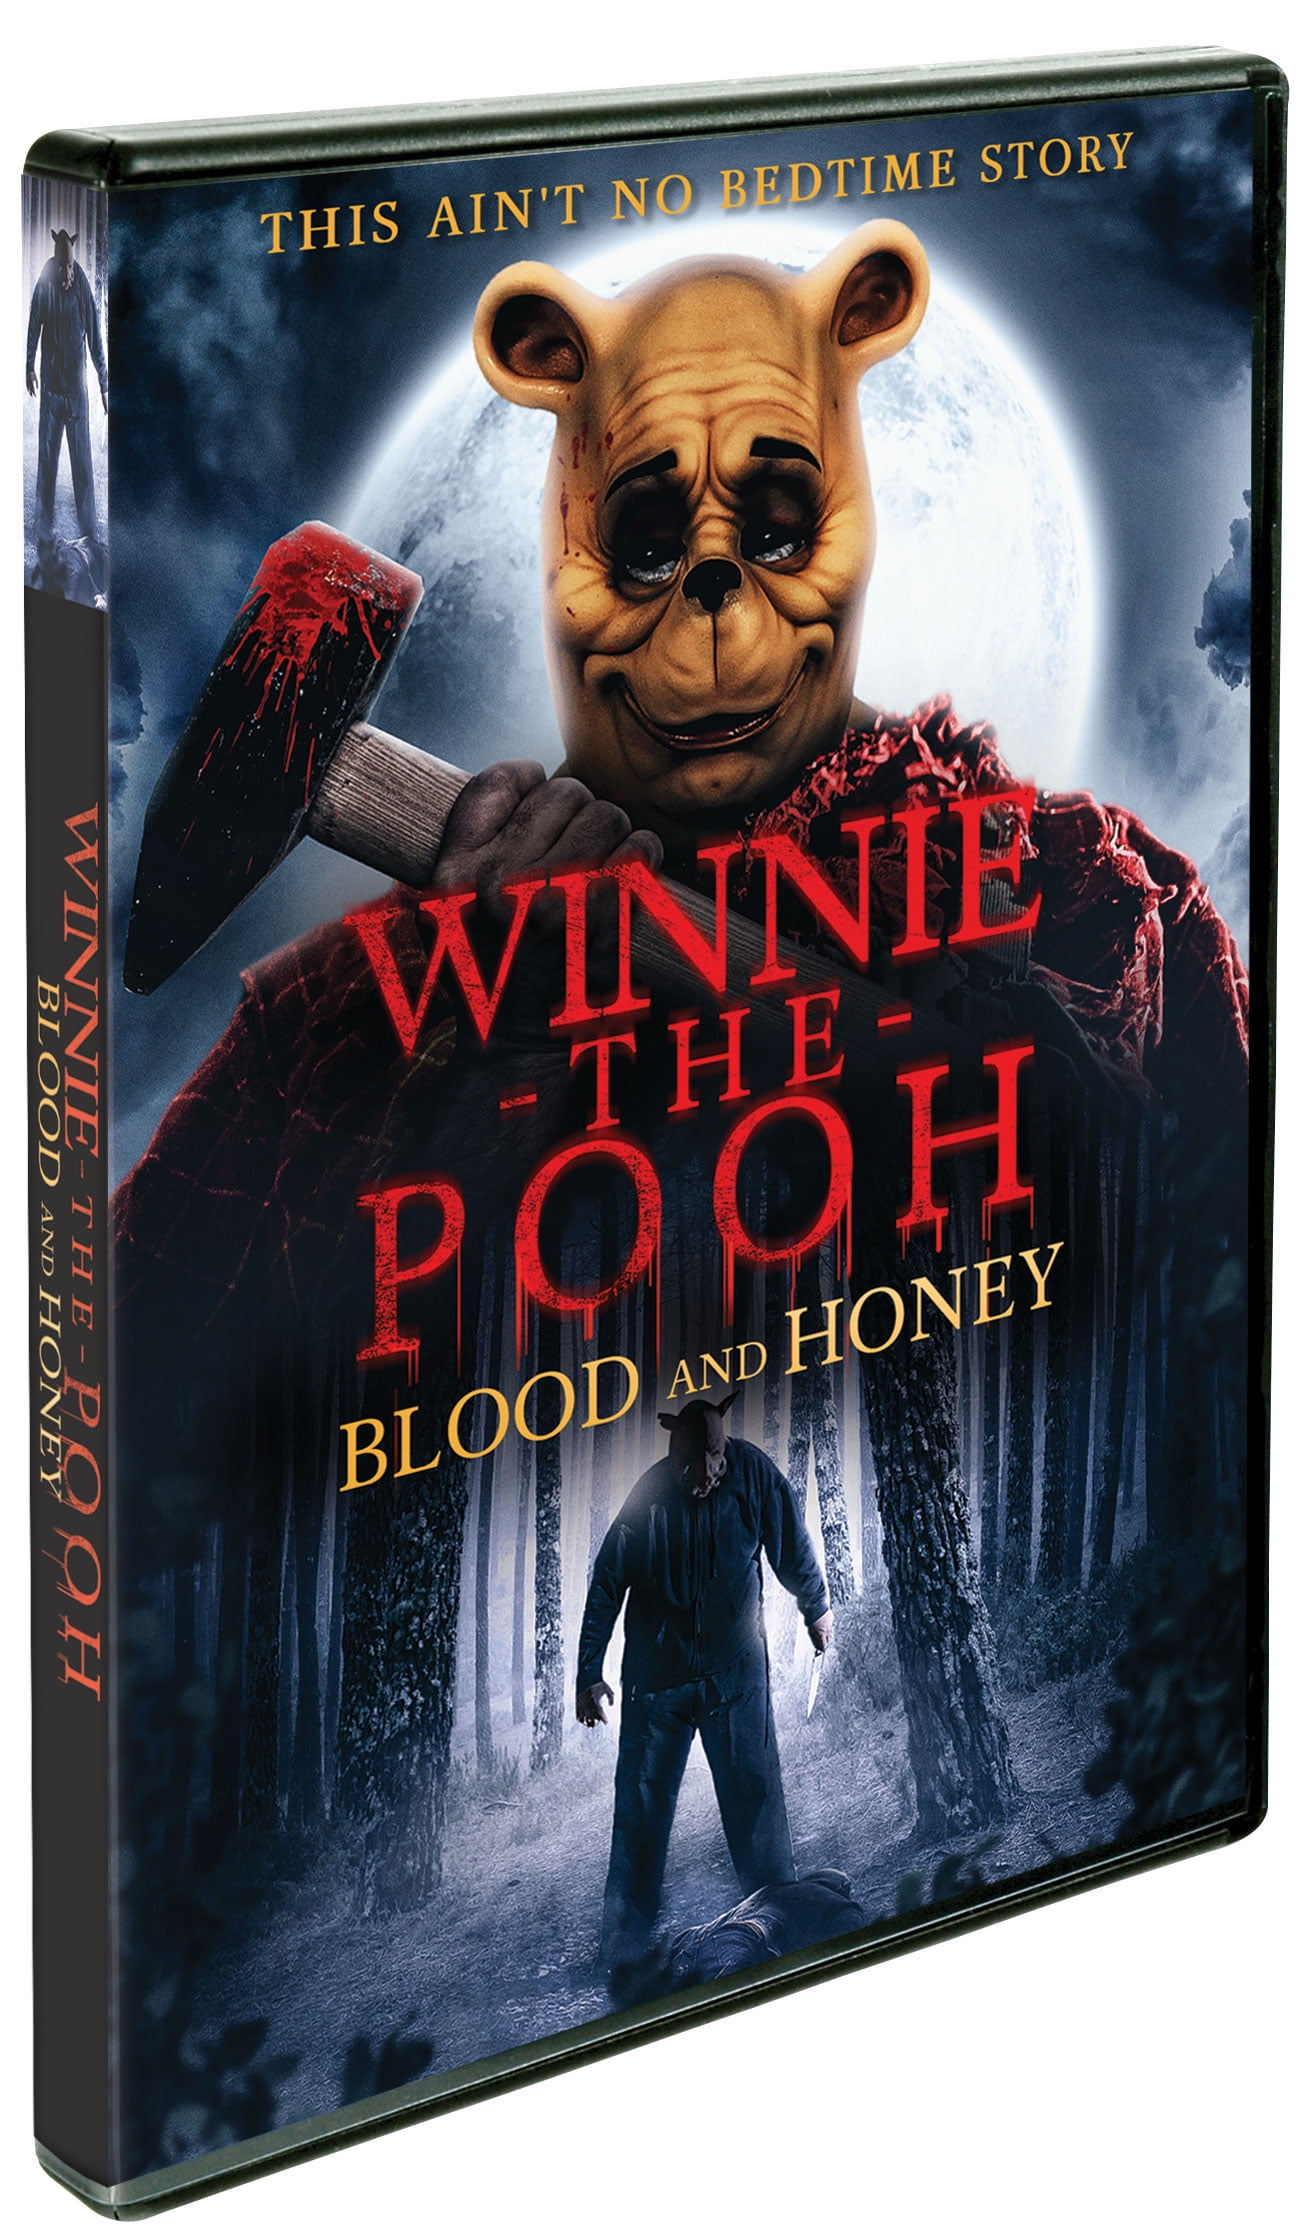 Winnie the Pooh: Blood and Honey: Everything to Know